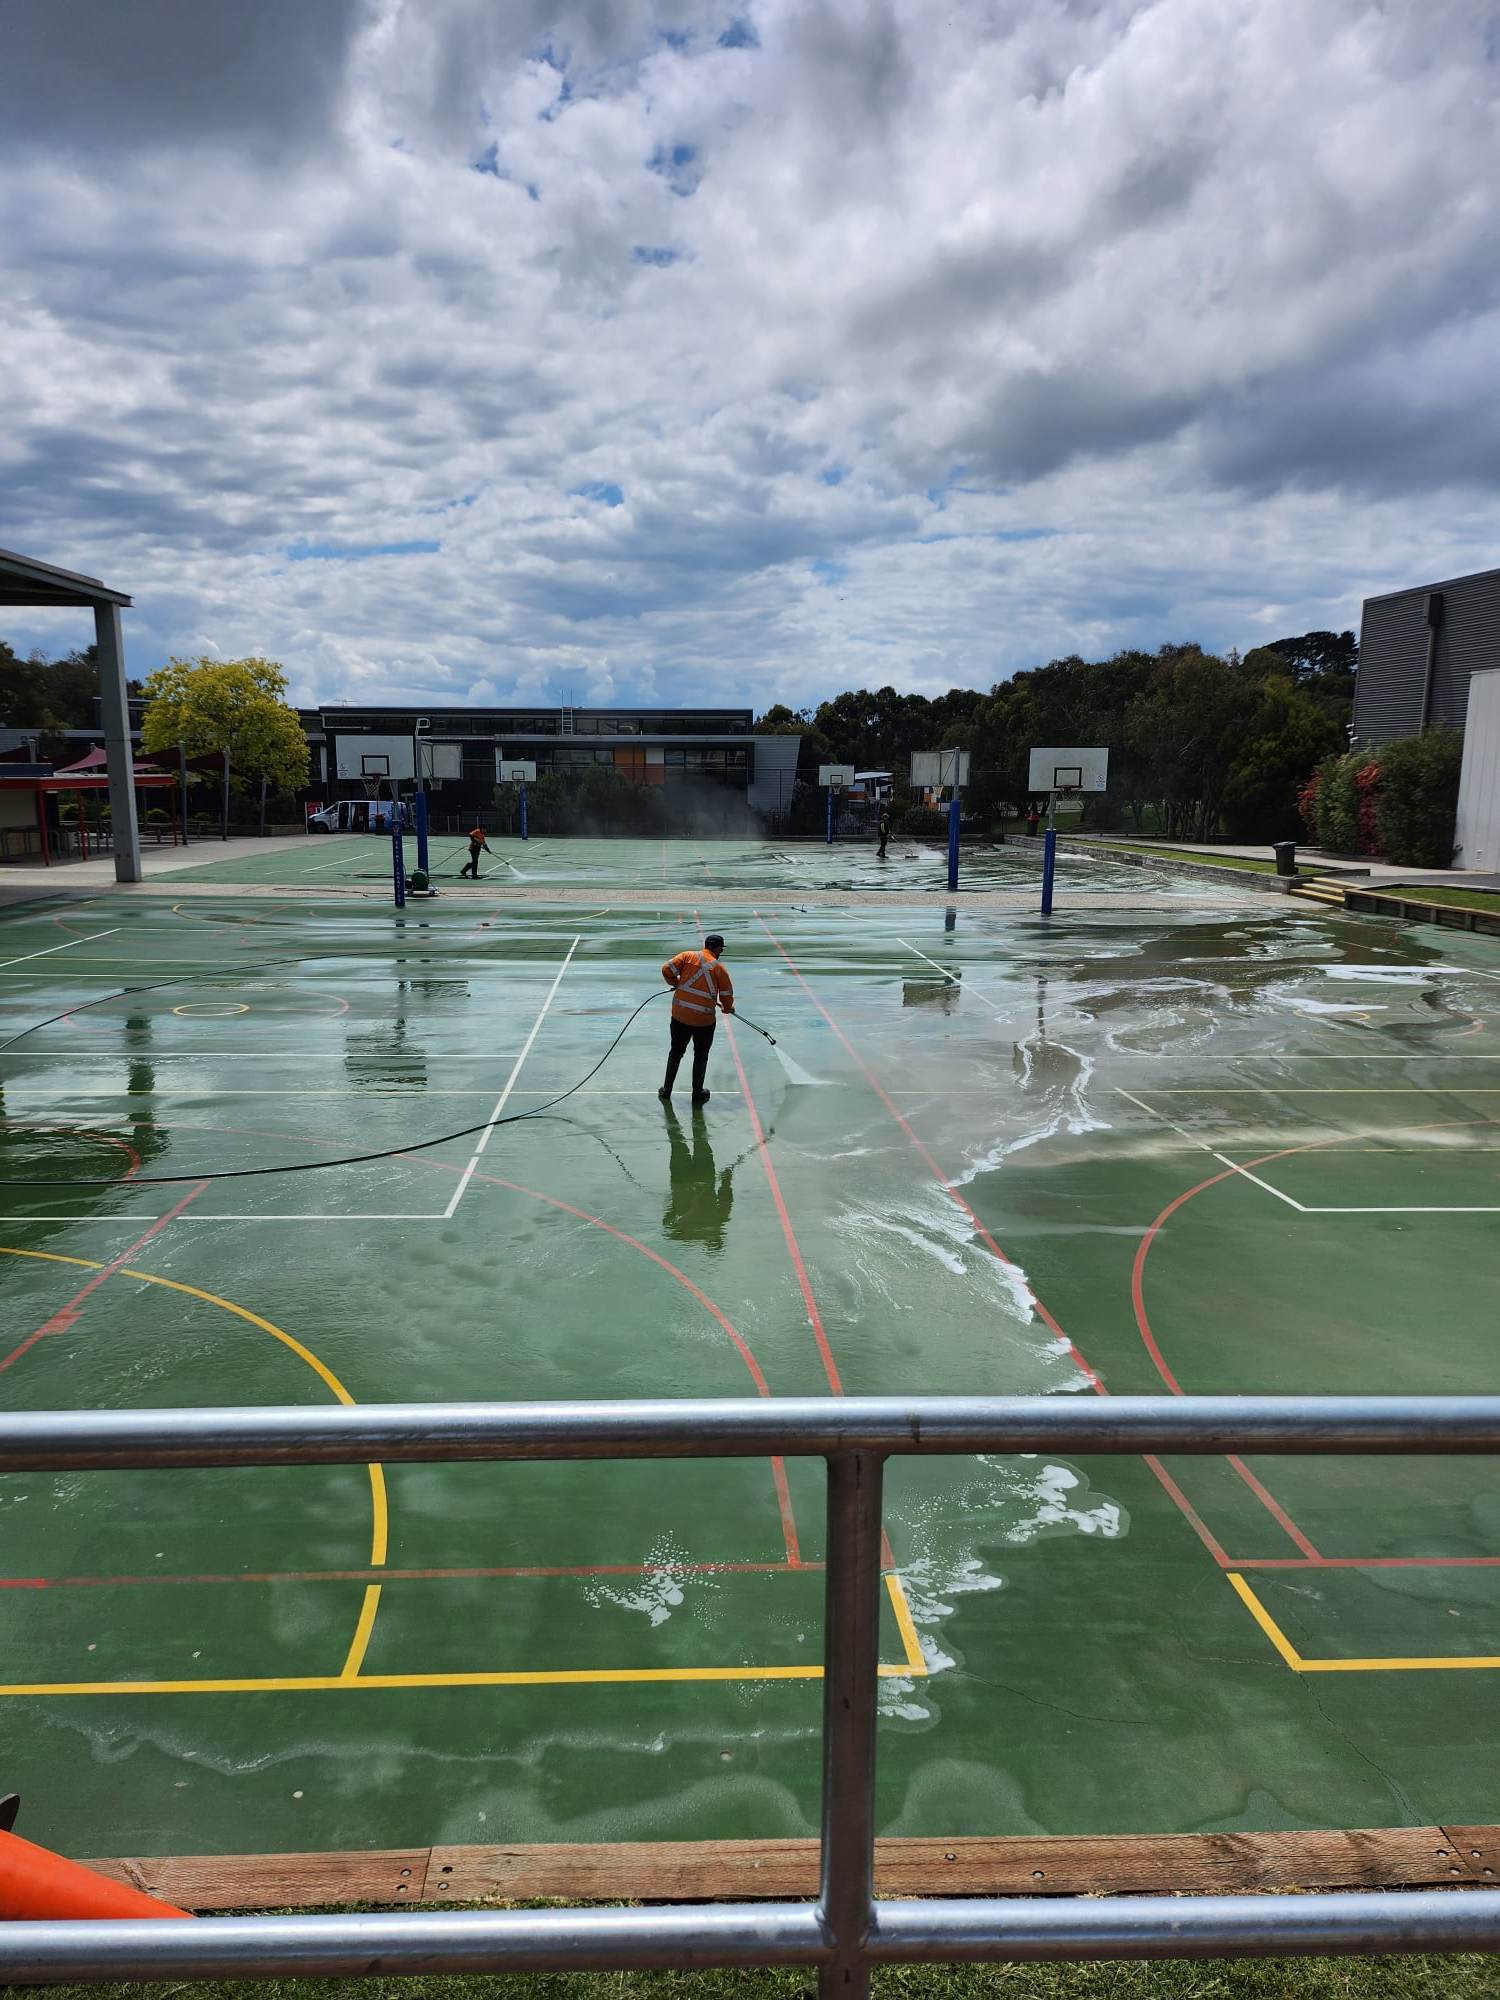 Technician High Pressure Cleaning Green School Sport Courts